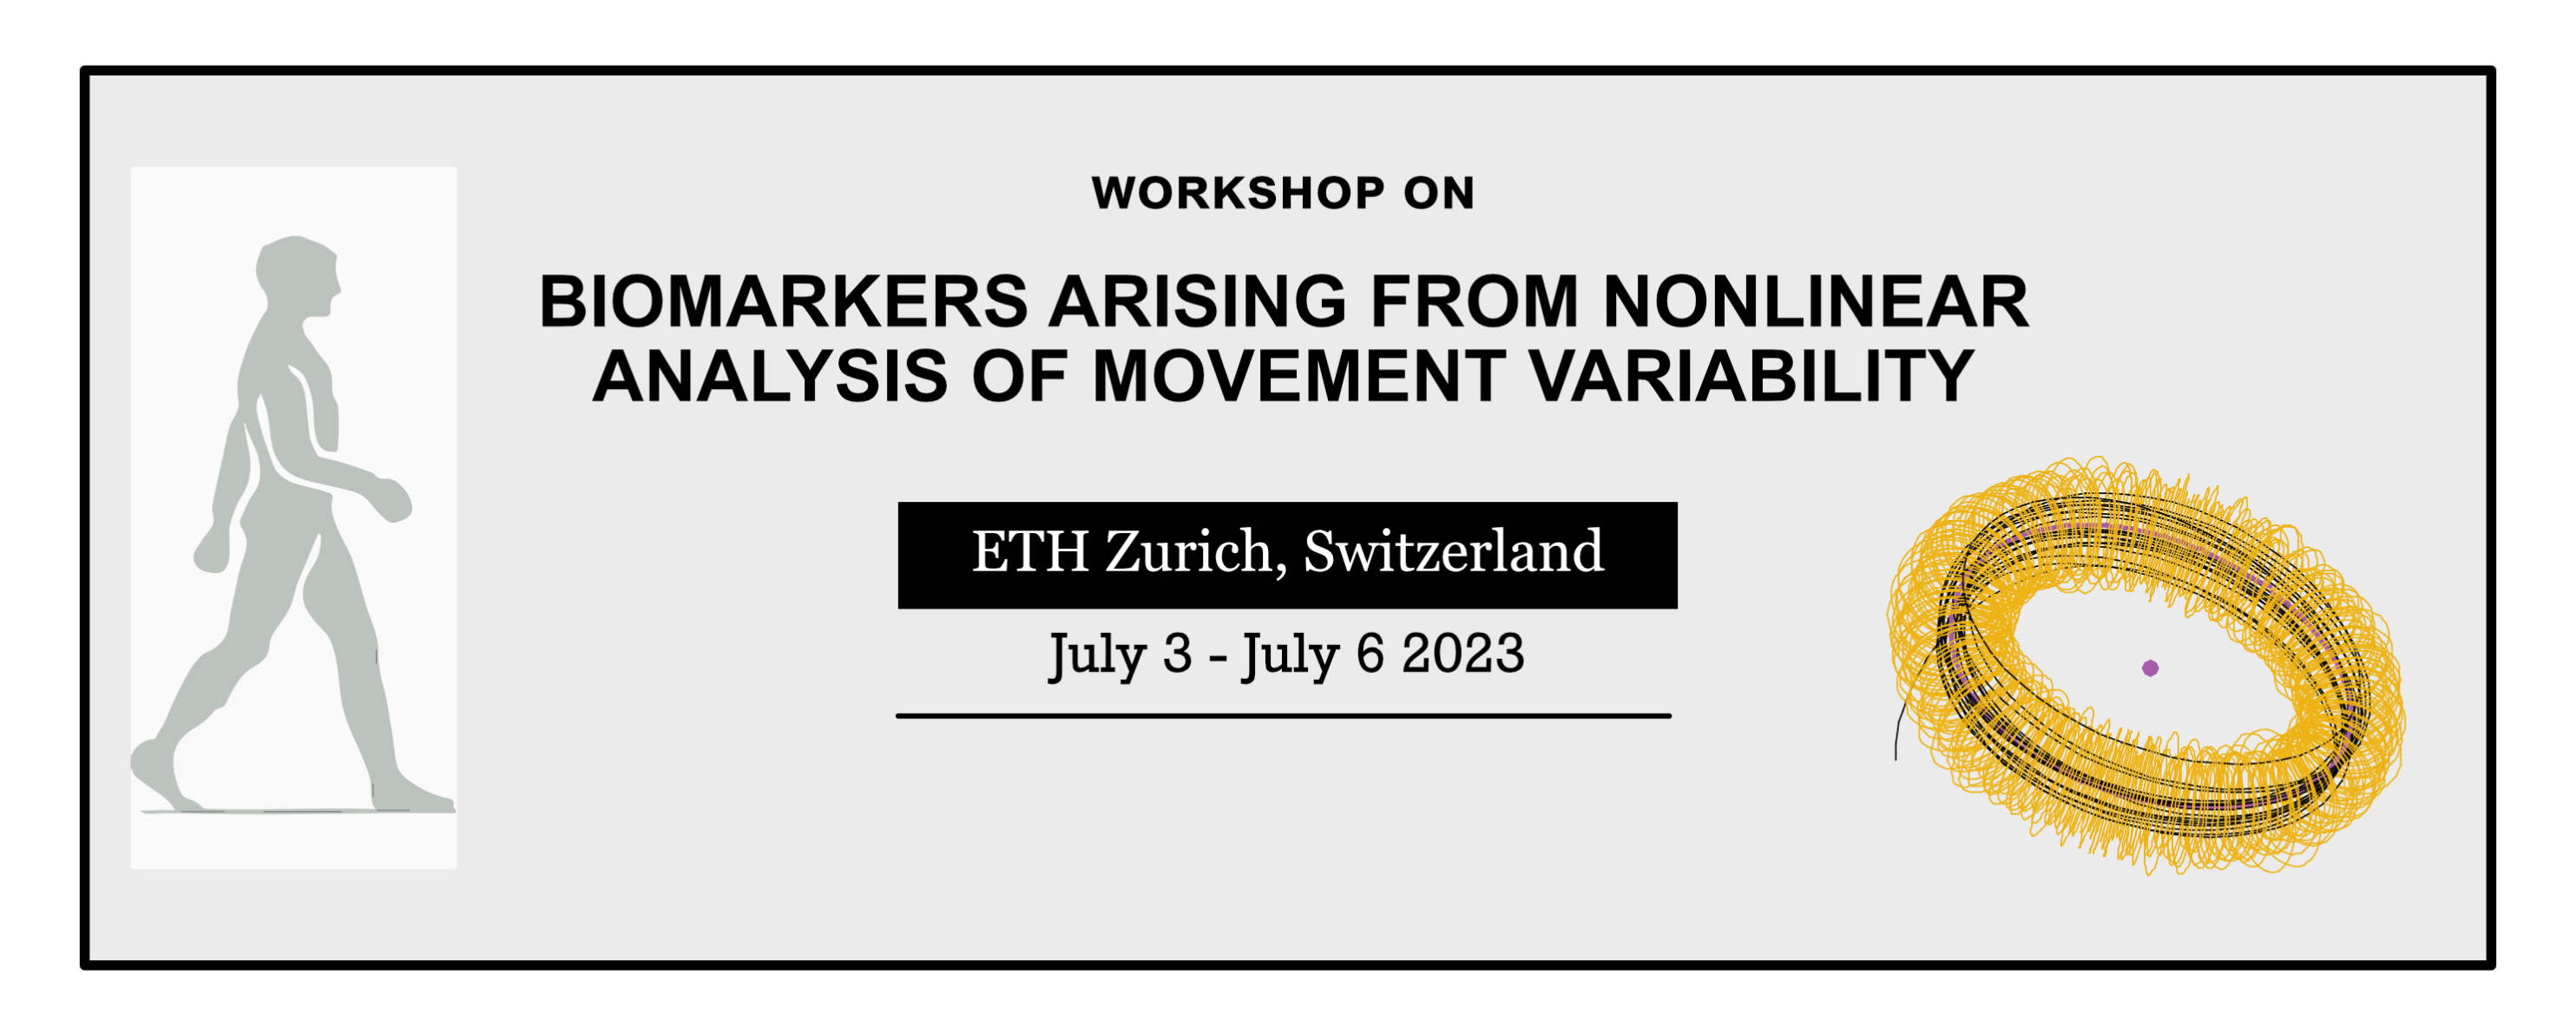 Banner of workshop “Biomarkers arising from nonlinear analysis of movement variability”. ETH Zurich from July 3rd to July 6th 2023